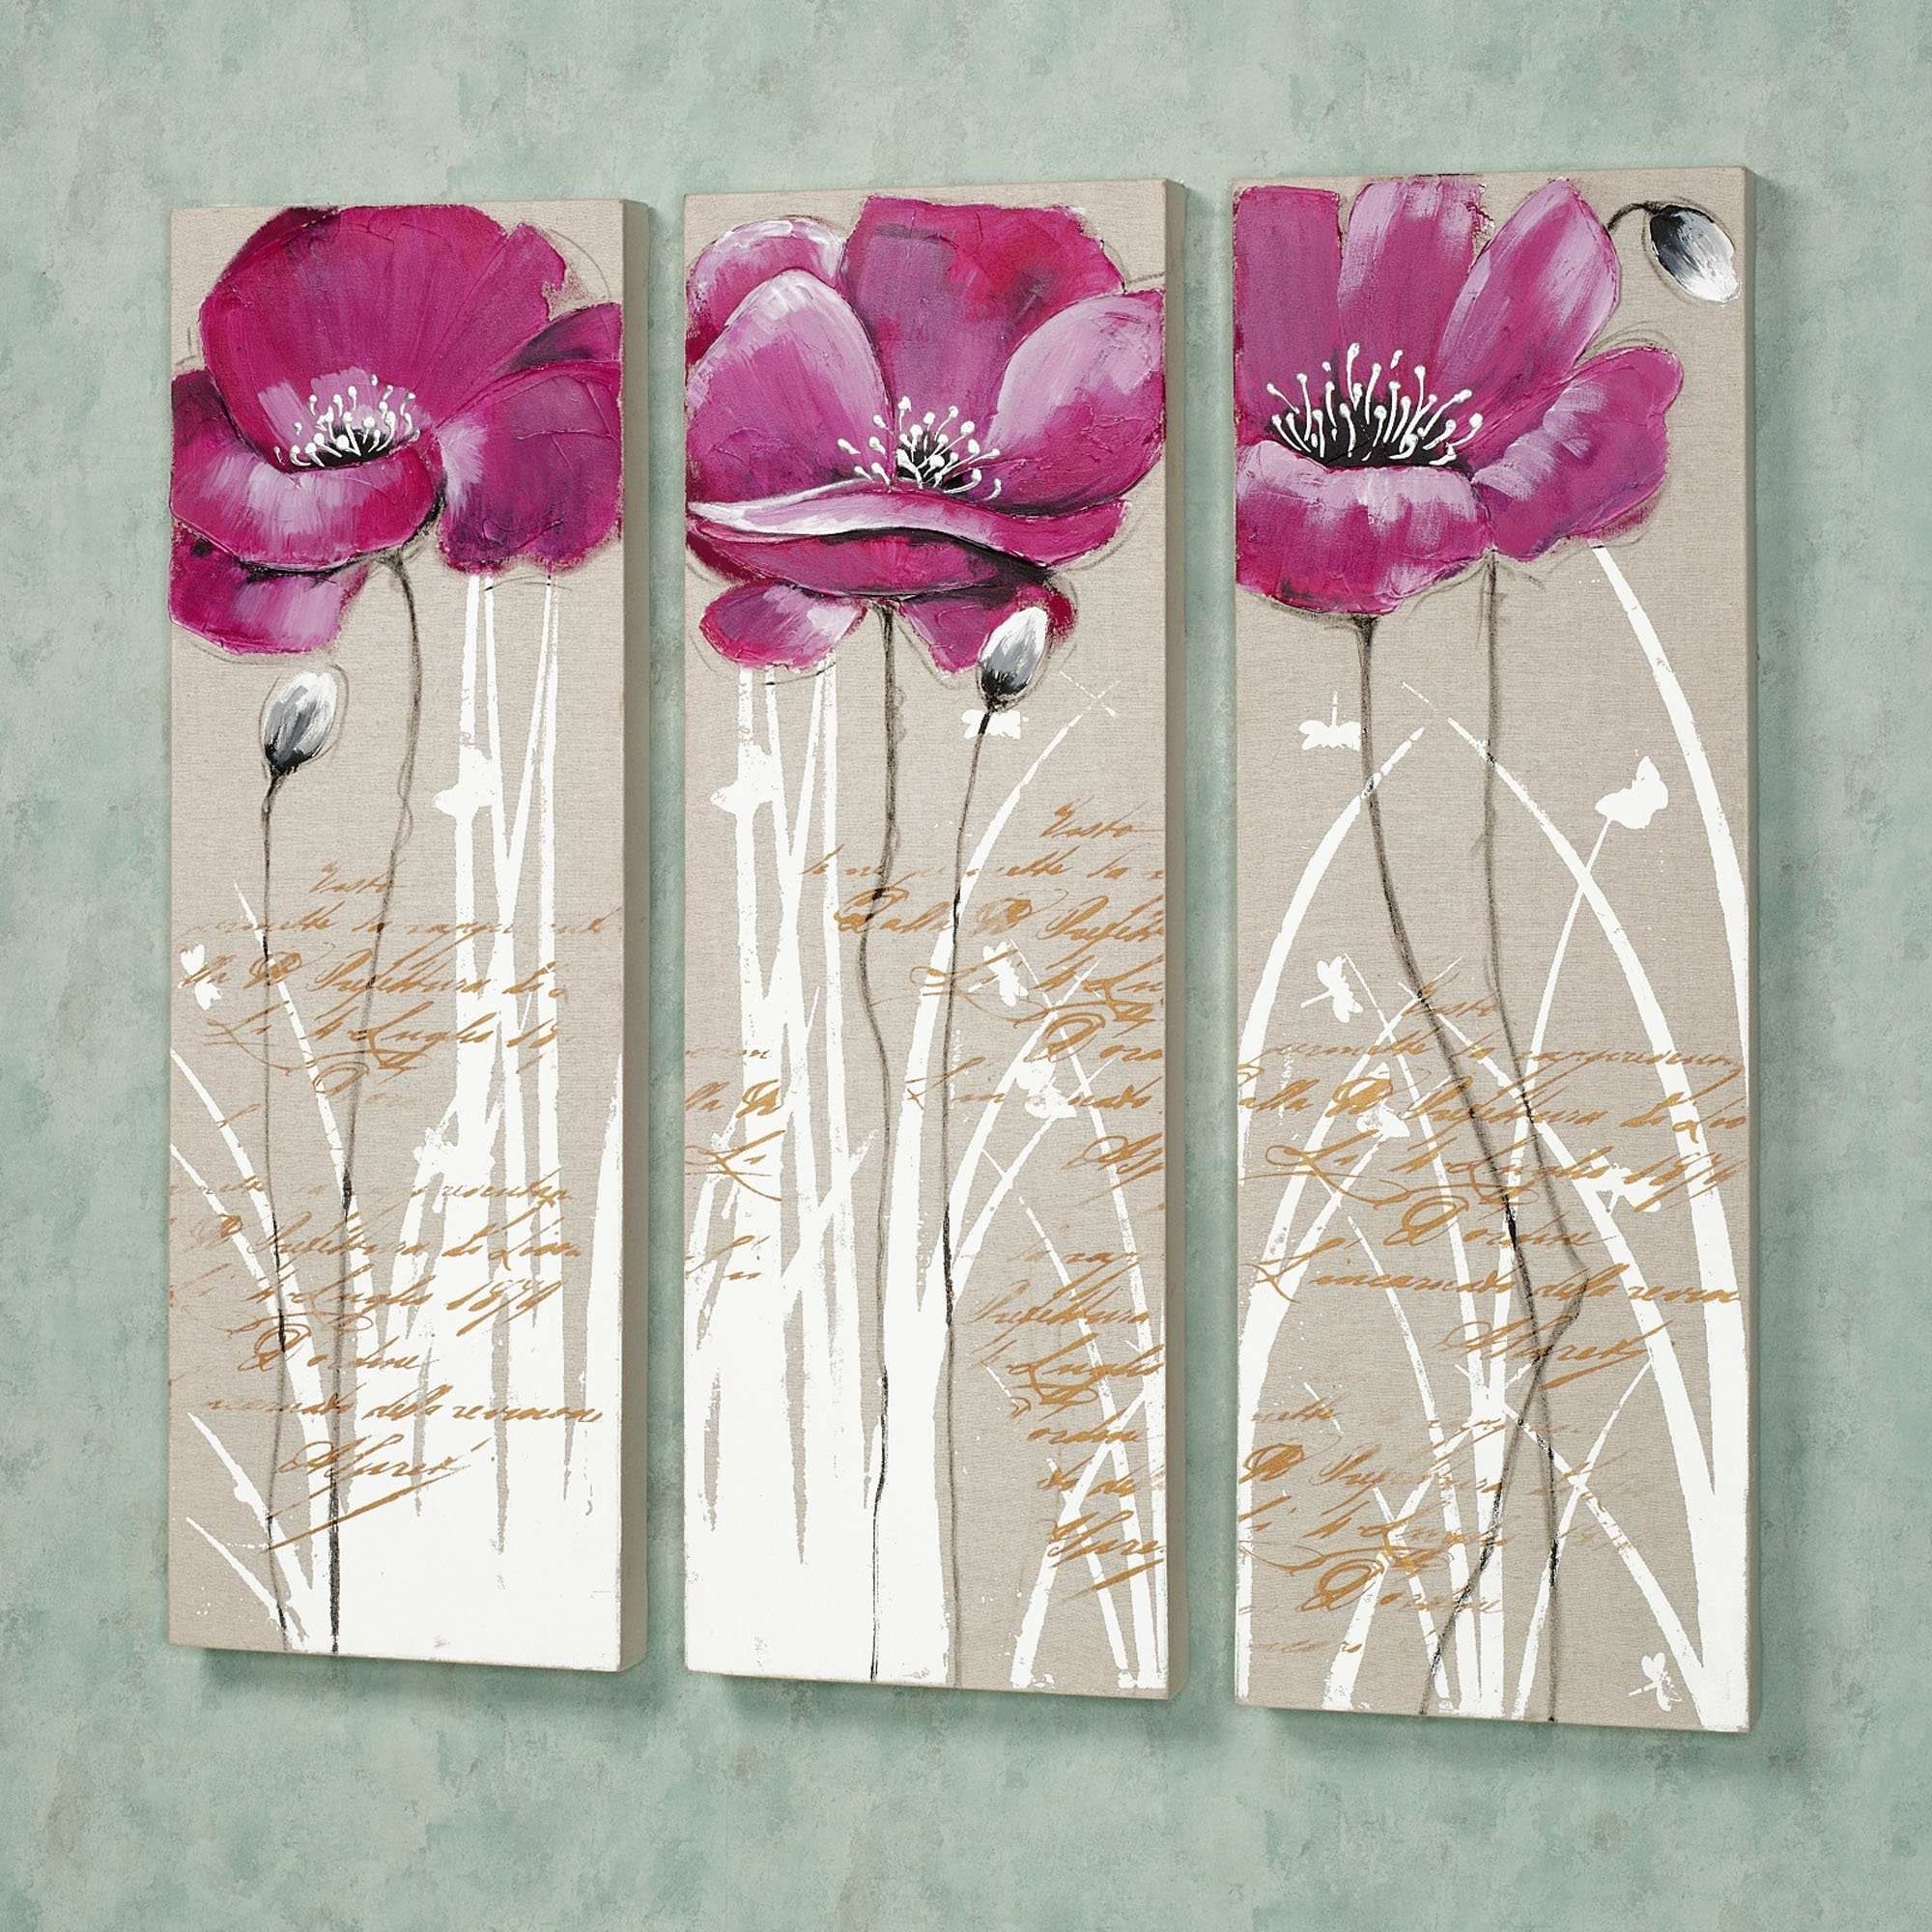 Flower Canvas Painting Inspirational Wall Art Designs Canvas Floral For Floral Canvas Wall Art (View 14 of 20)